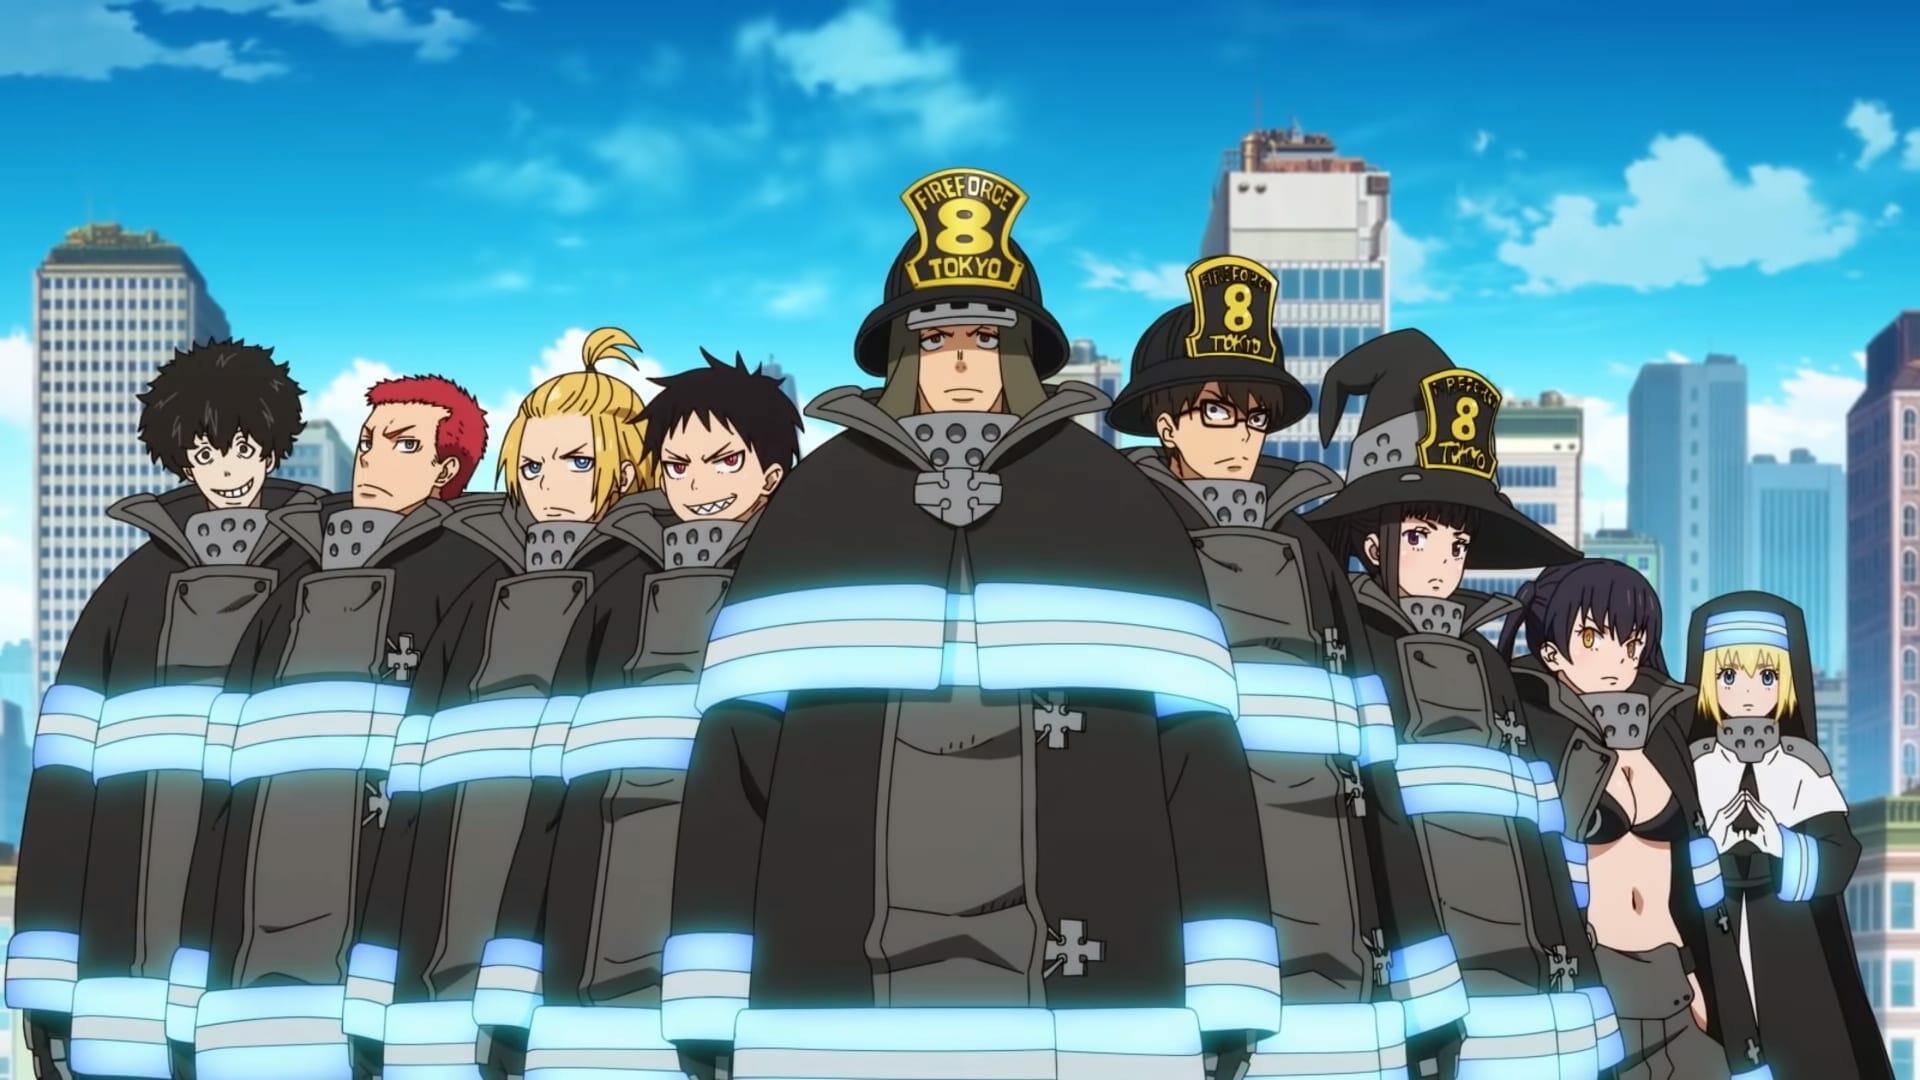 Fire Force Season 2 Anime to Have 24 Episodes, Premieres on 3 July